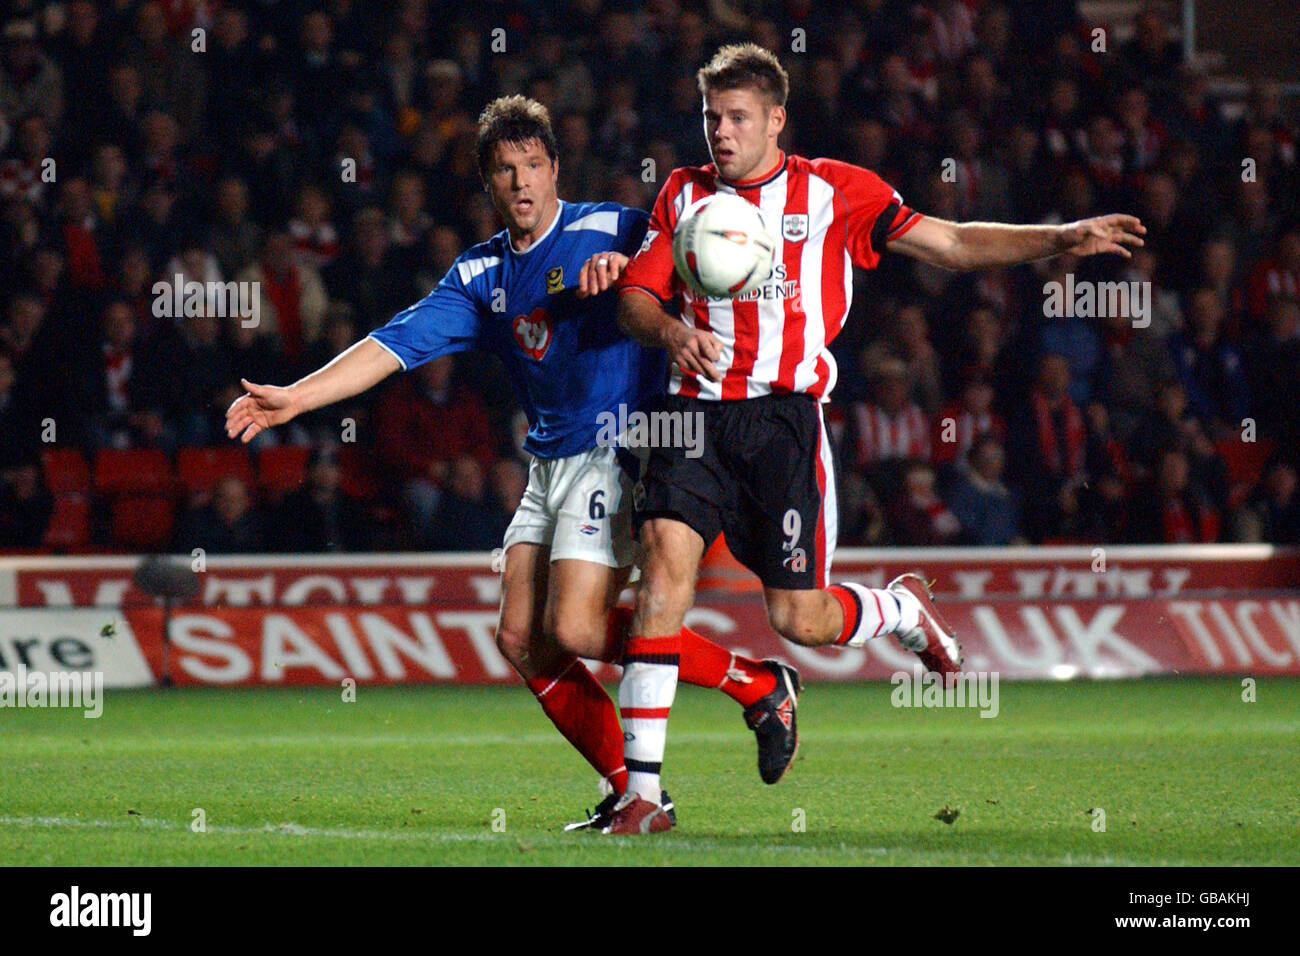 Soccer - Carling Cup - Fourth Round - Southampton v Portsmouth. Southampton's James Beattie and Portsmouth's Arjan De Zeeuw Stock Photo